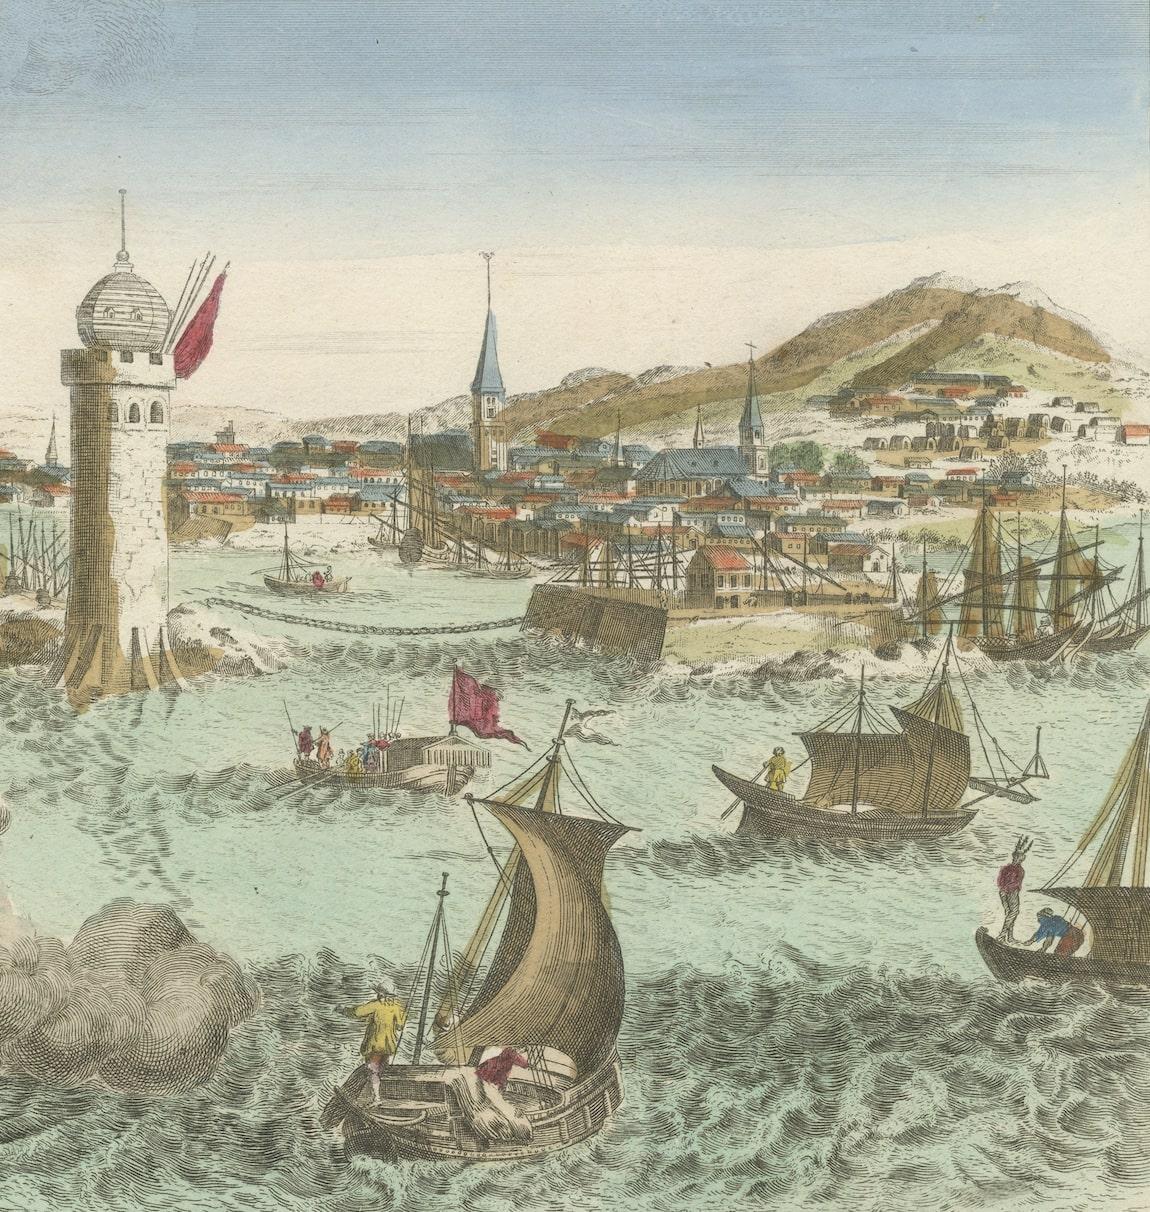 Engraved Hand-Colored Optica Print of the Harbour of Havanna, Cuba For Sale